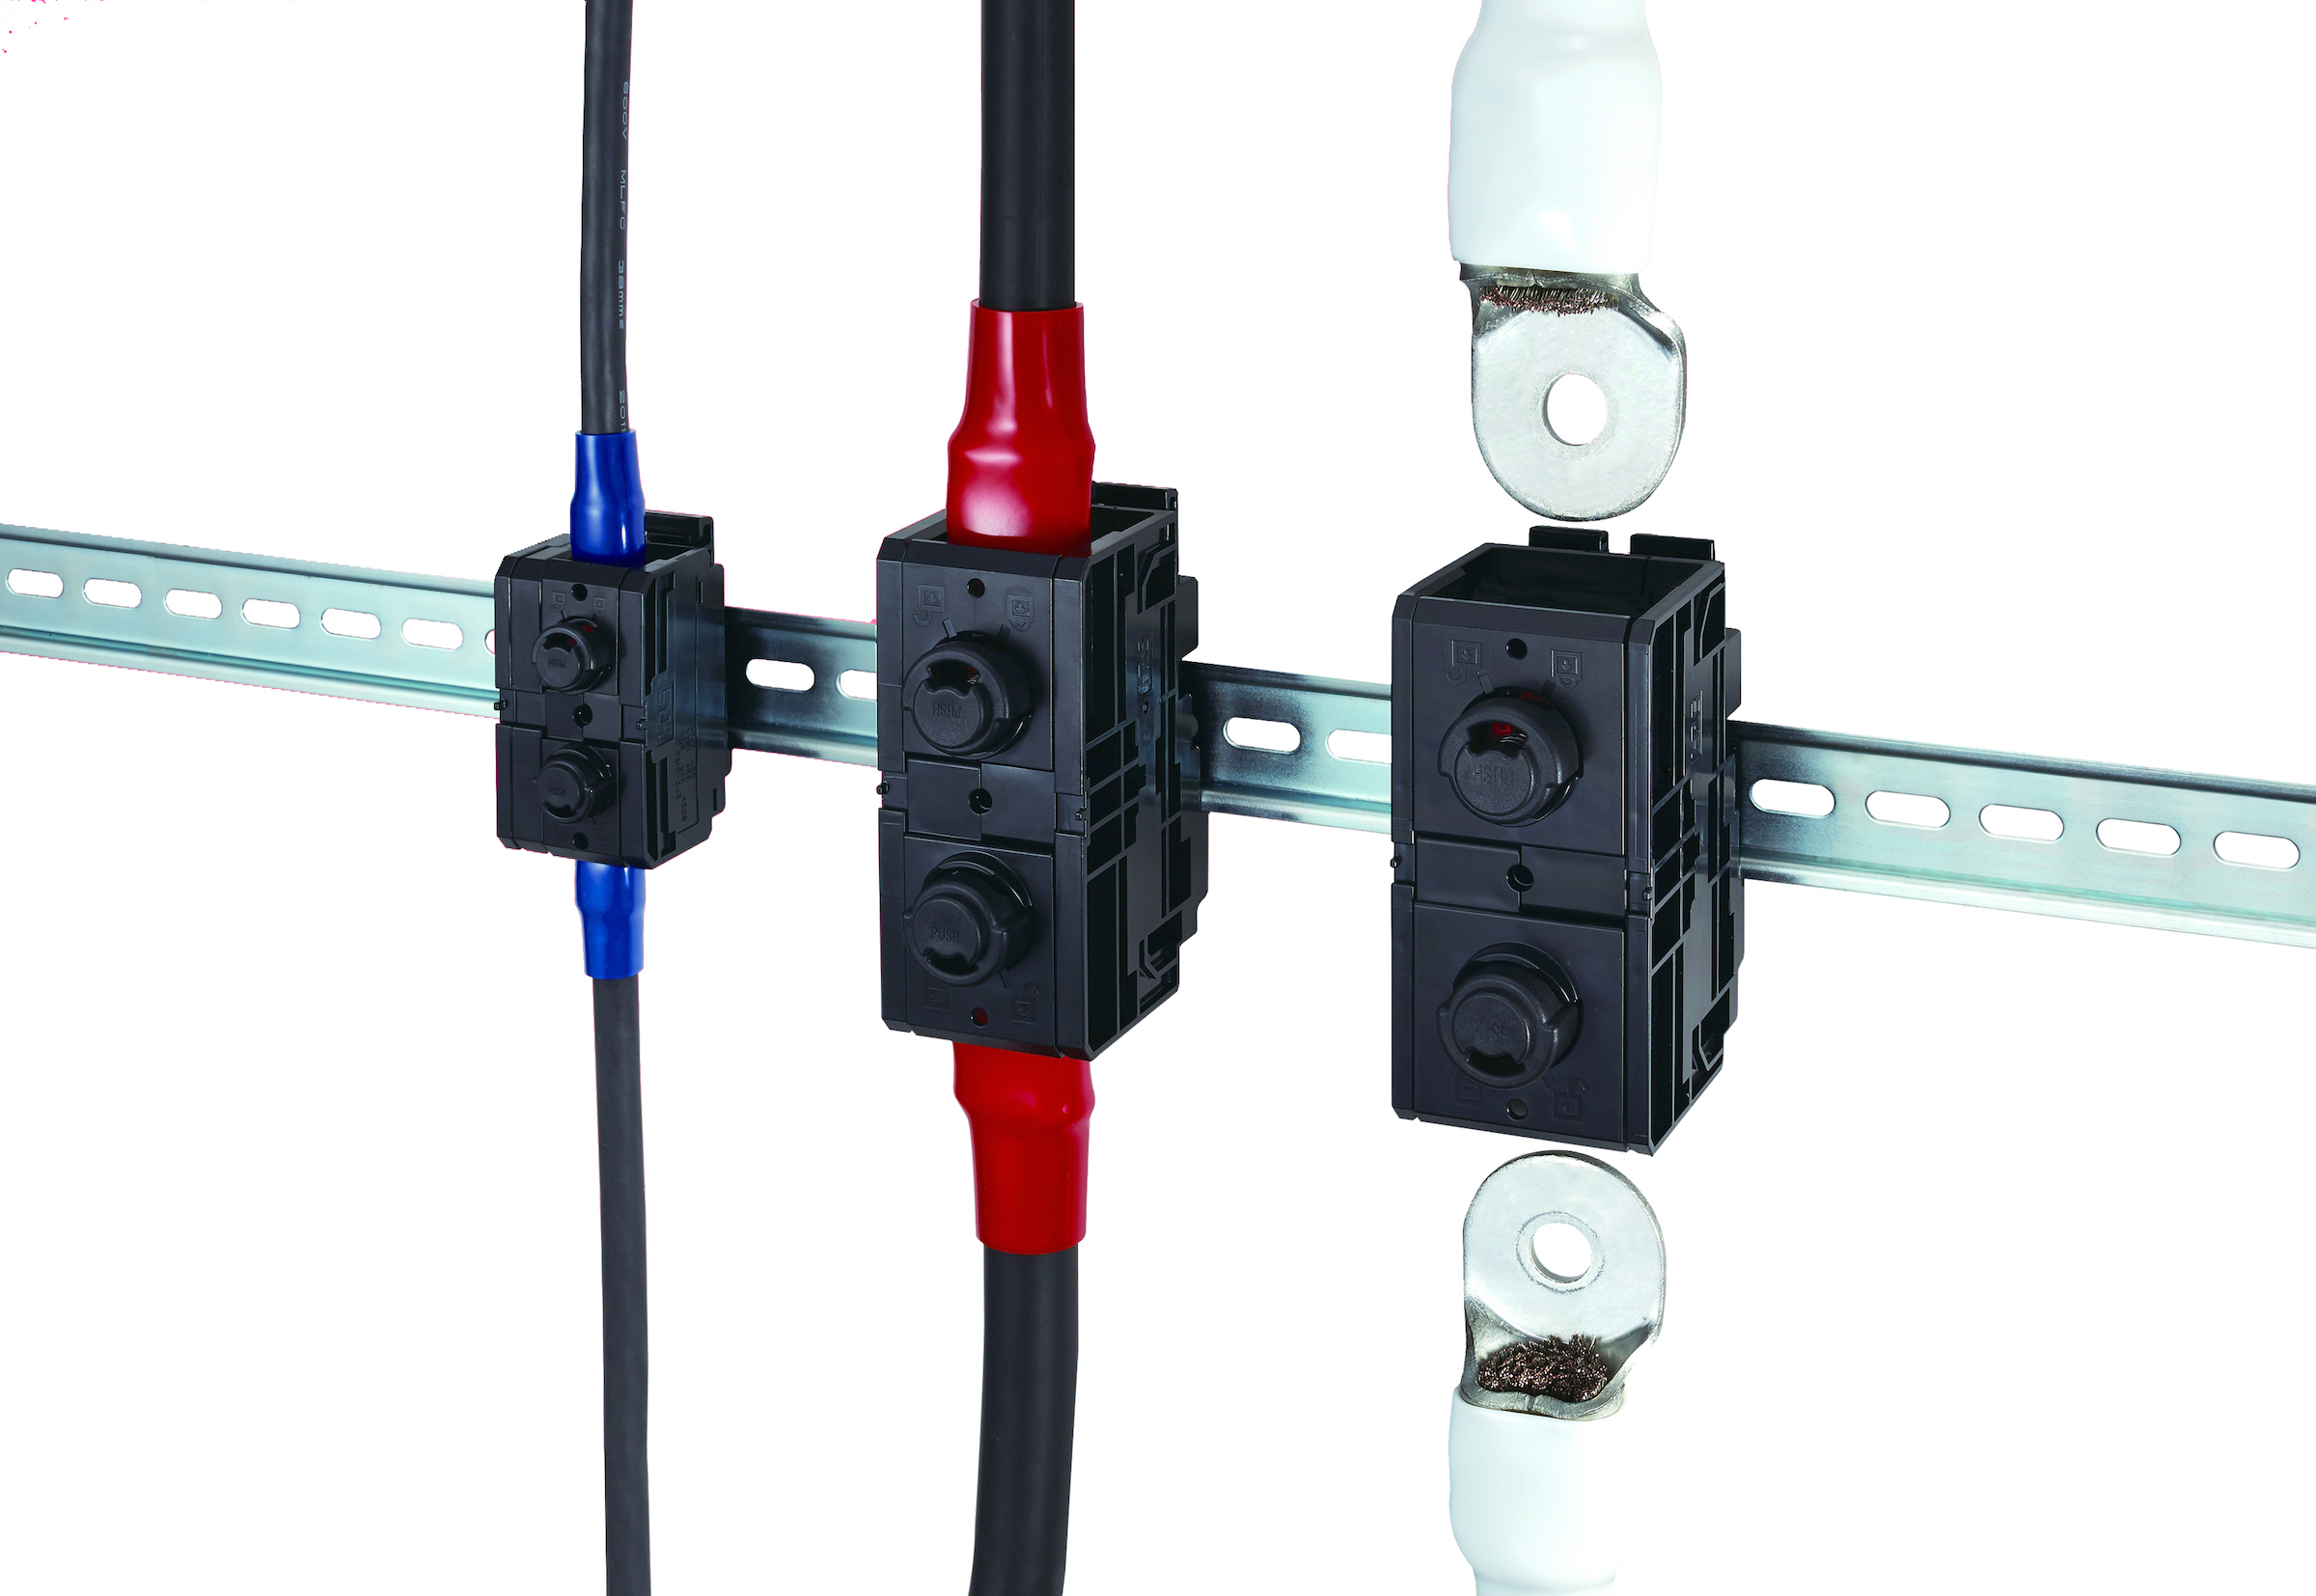 Screwless Terminal Block Reduces Maintenance by up to 40%